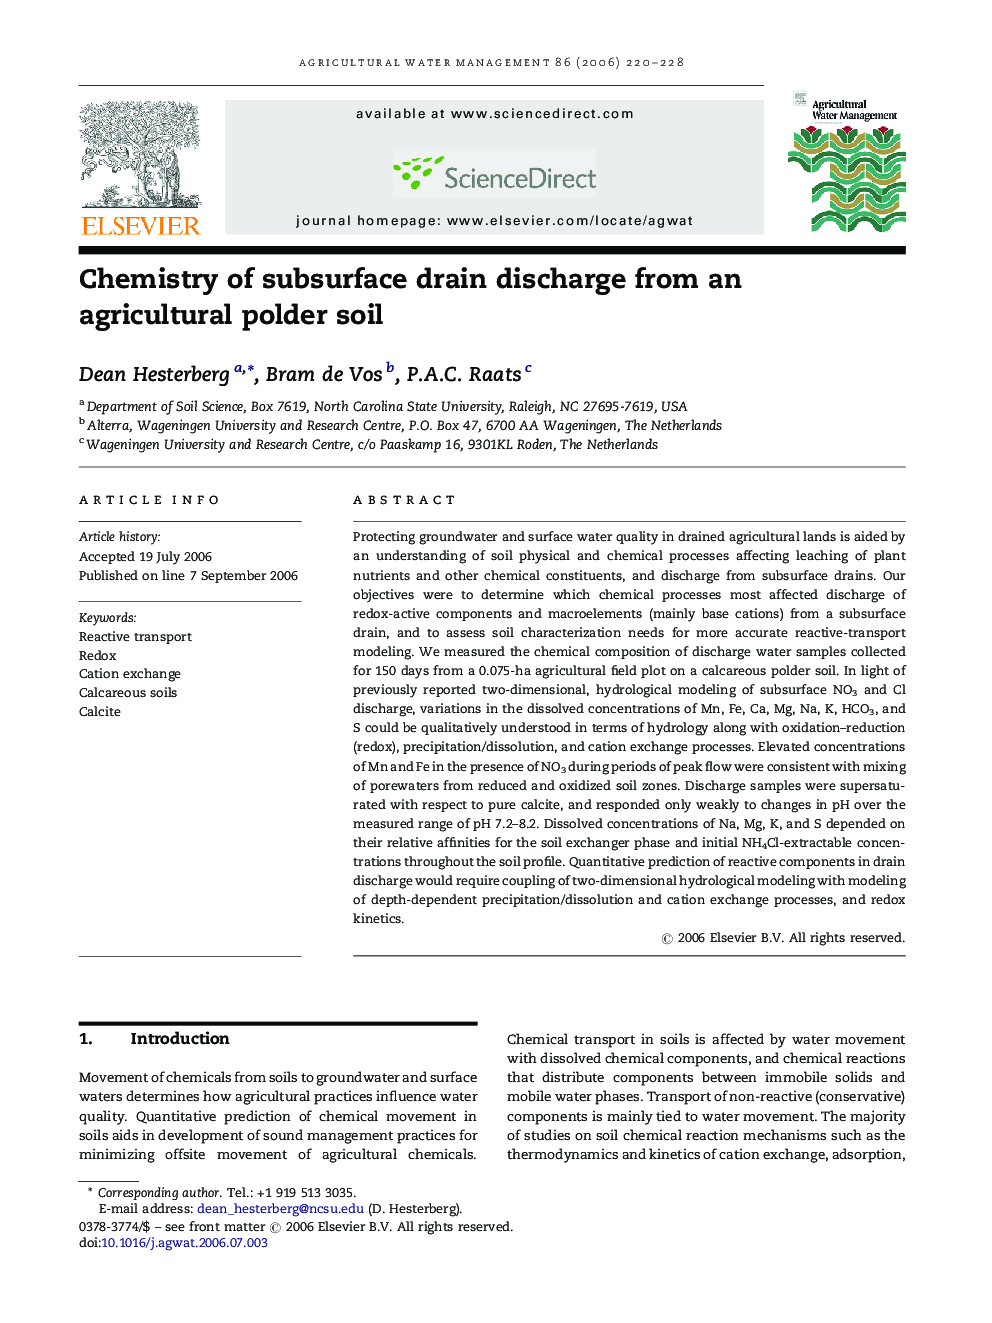 Chemistry of subsurface drain discharge from an agricultural polder soil